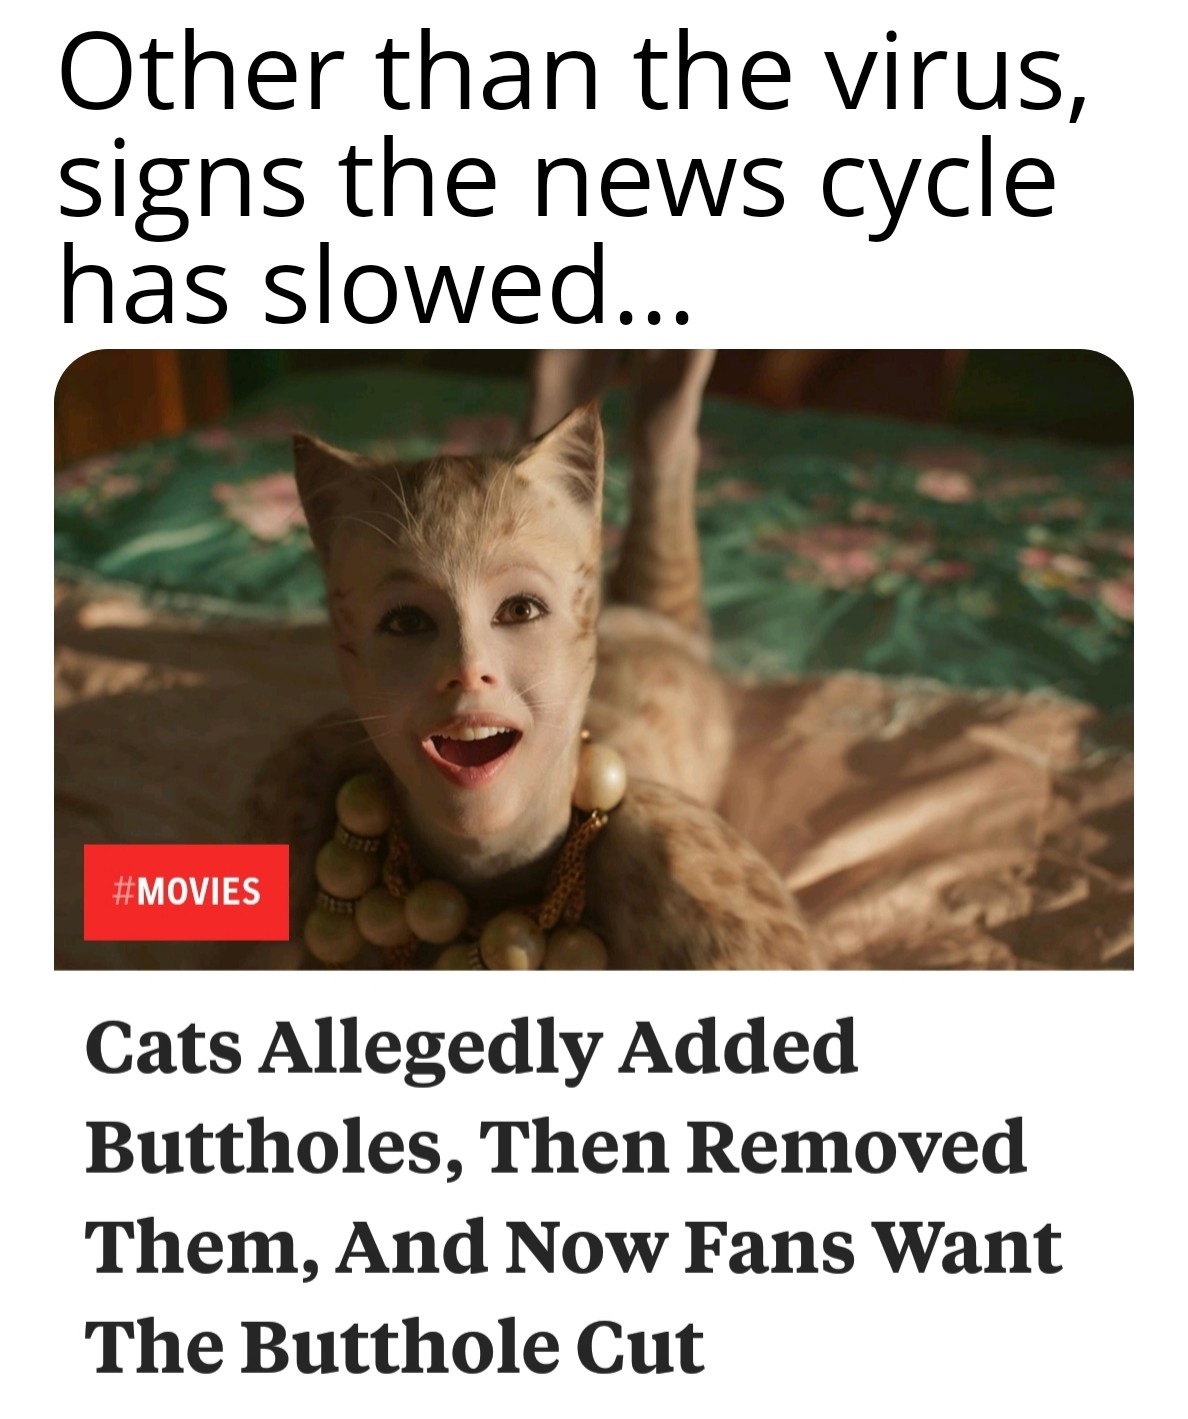 cambria font - Other than the virus, signs the news cycle has slowed... Cats Allegedly Added Buttholes, Then Removed Them, And Now Fans Want The Butthole Cut